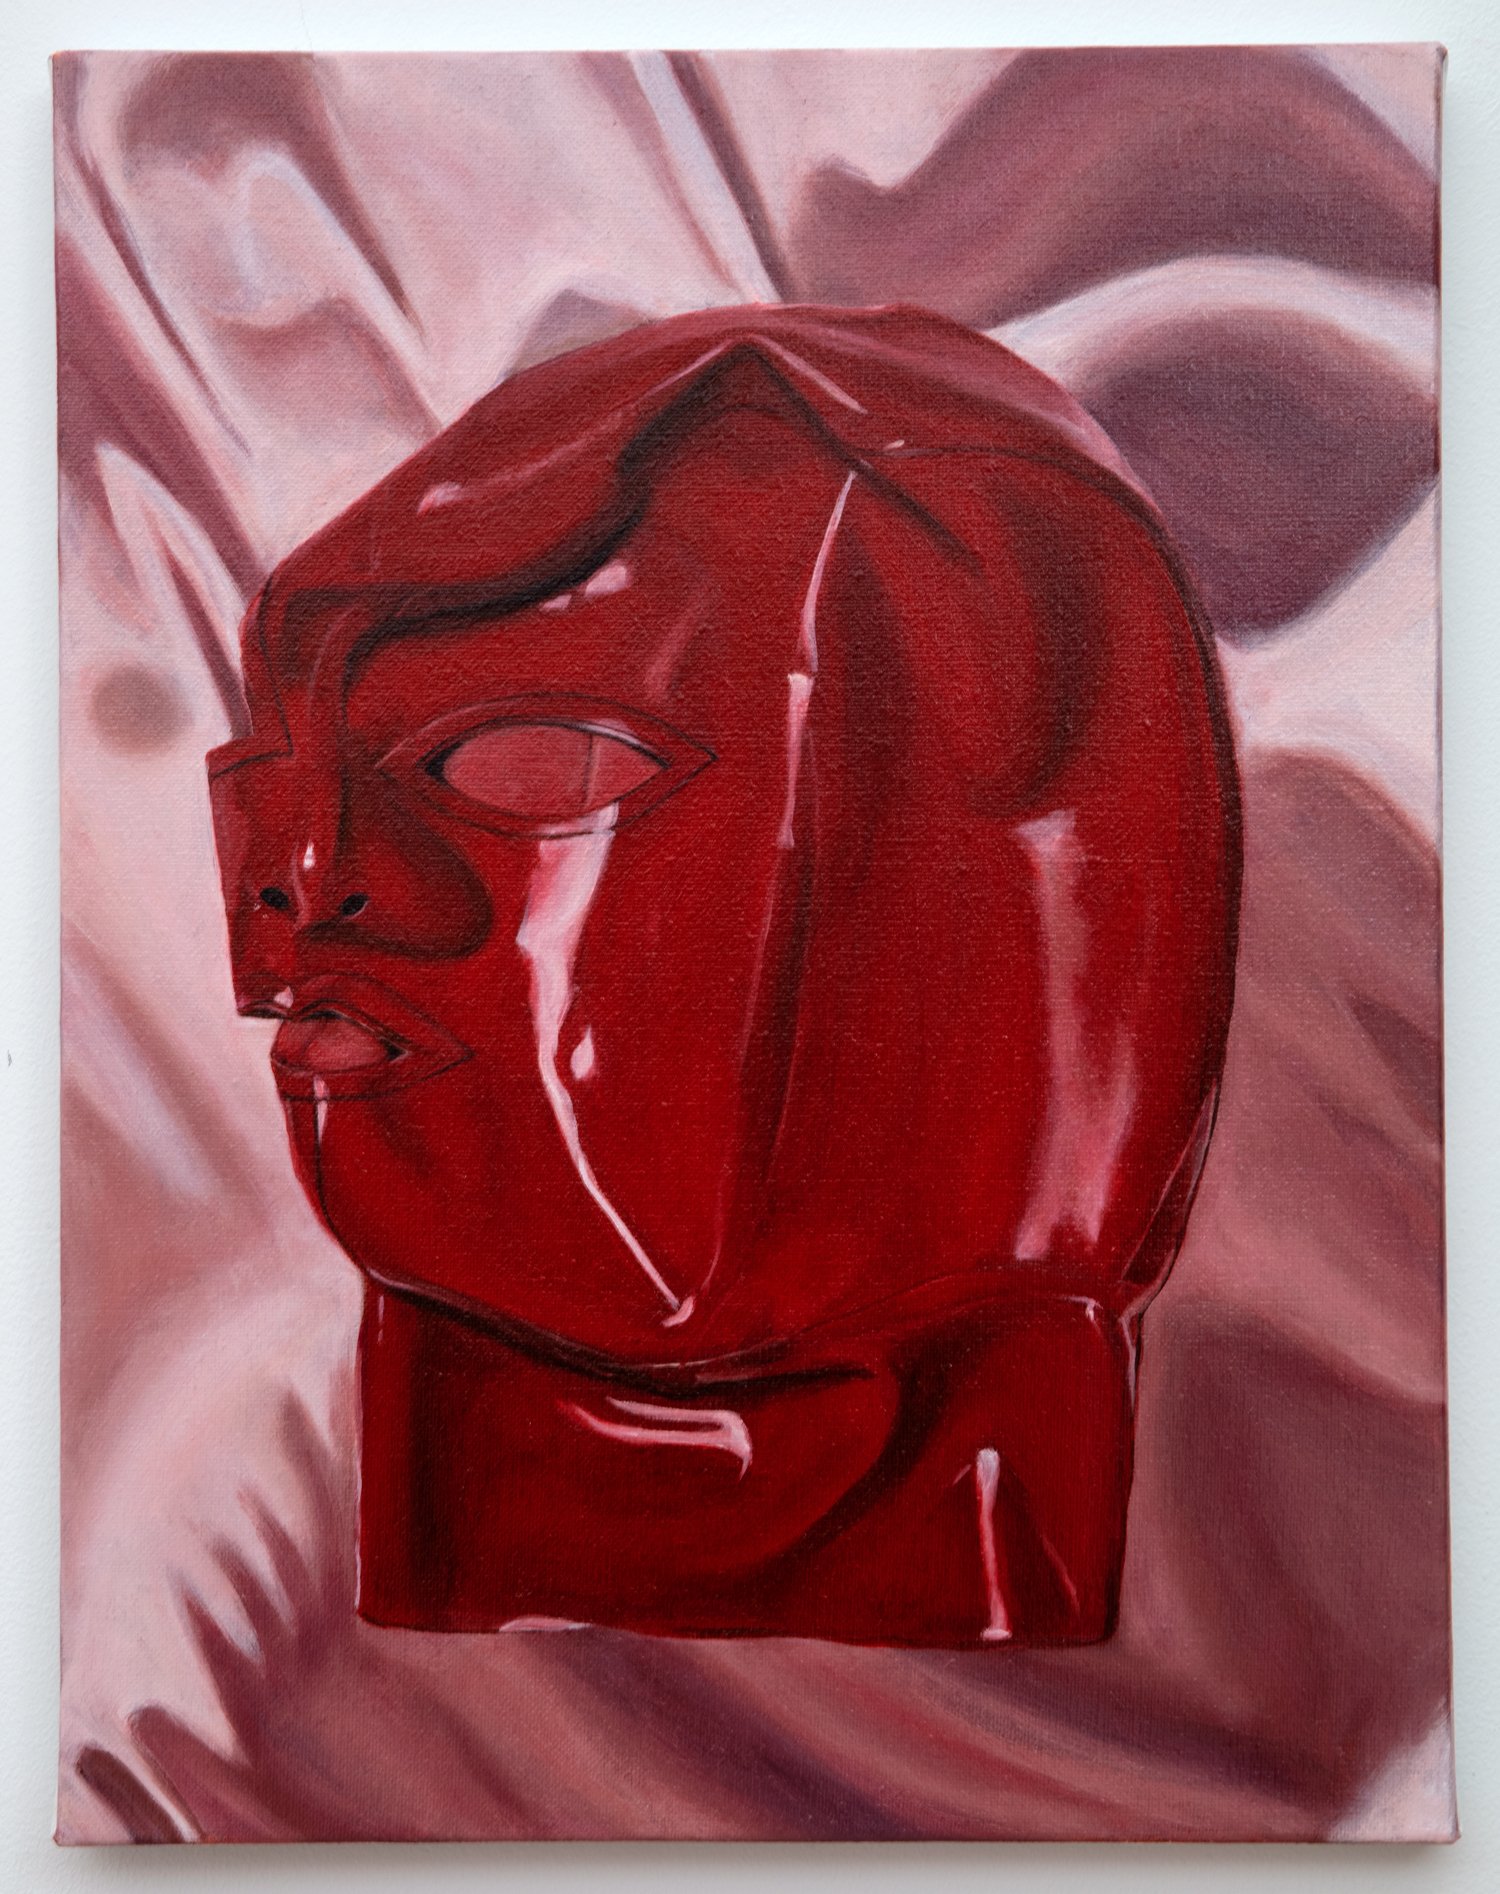  Lisa Saeboe,  Scarlet Armour , 2022, Oil on Linen, 14 x 18 inches 